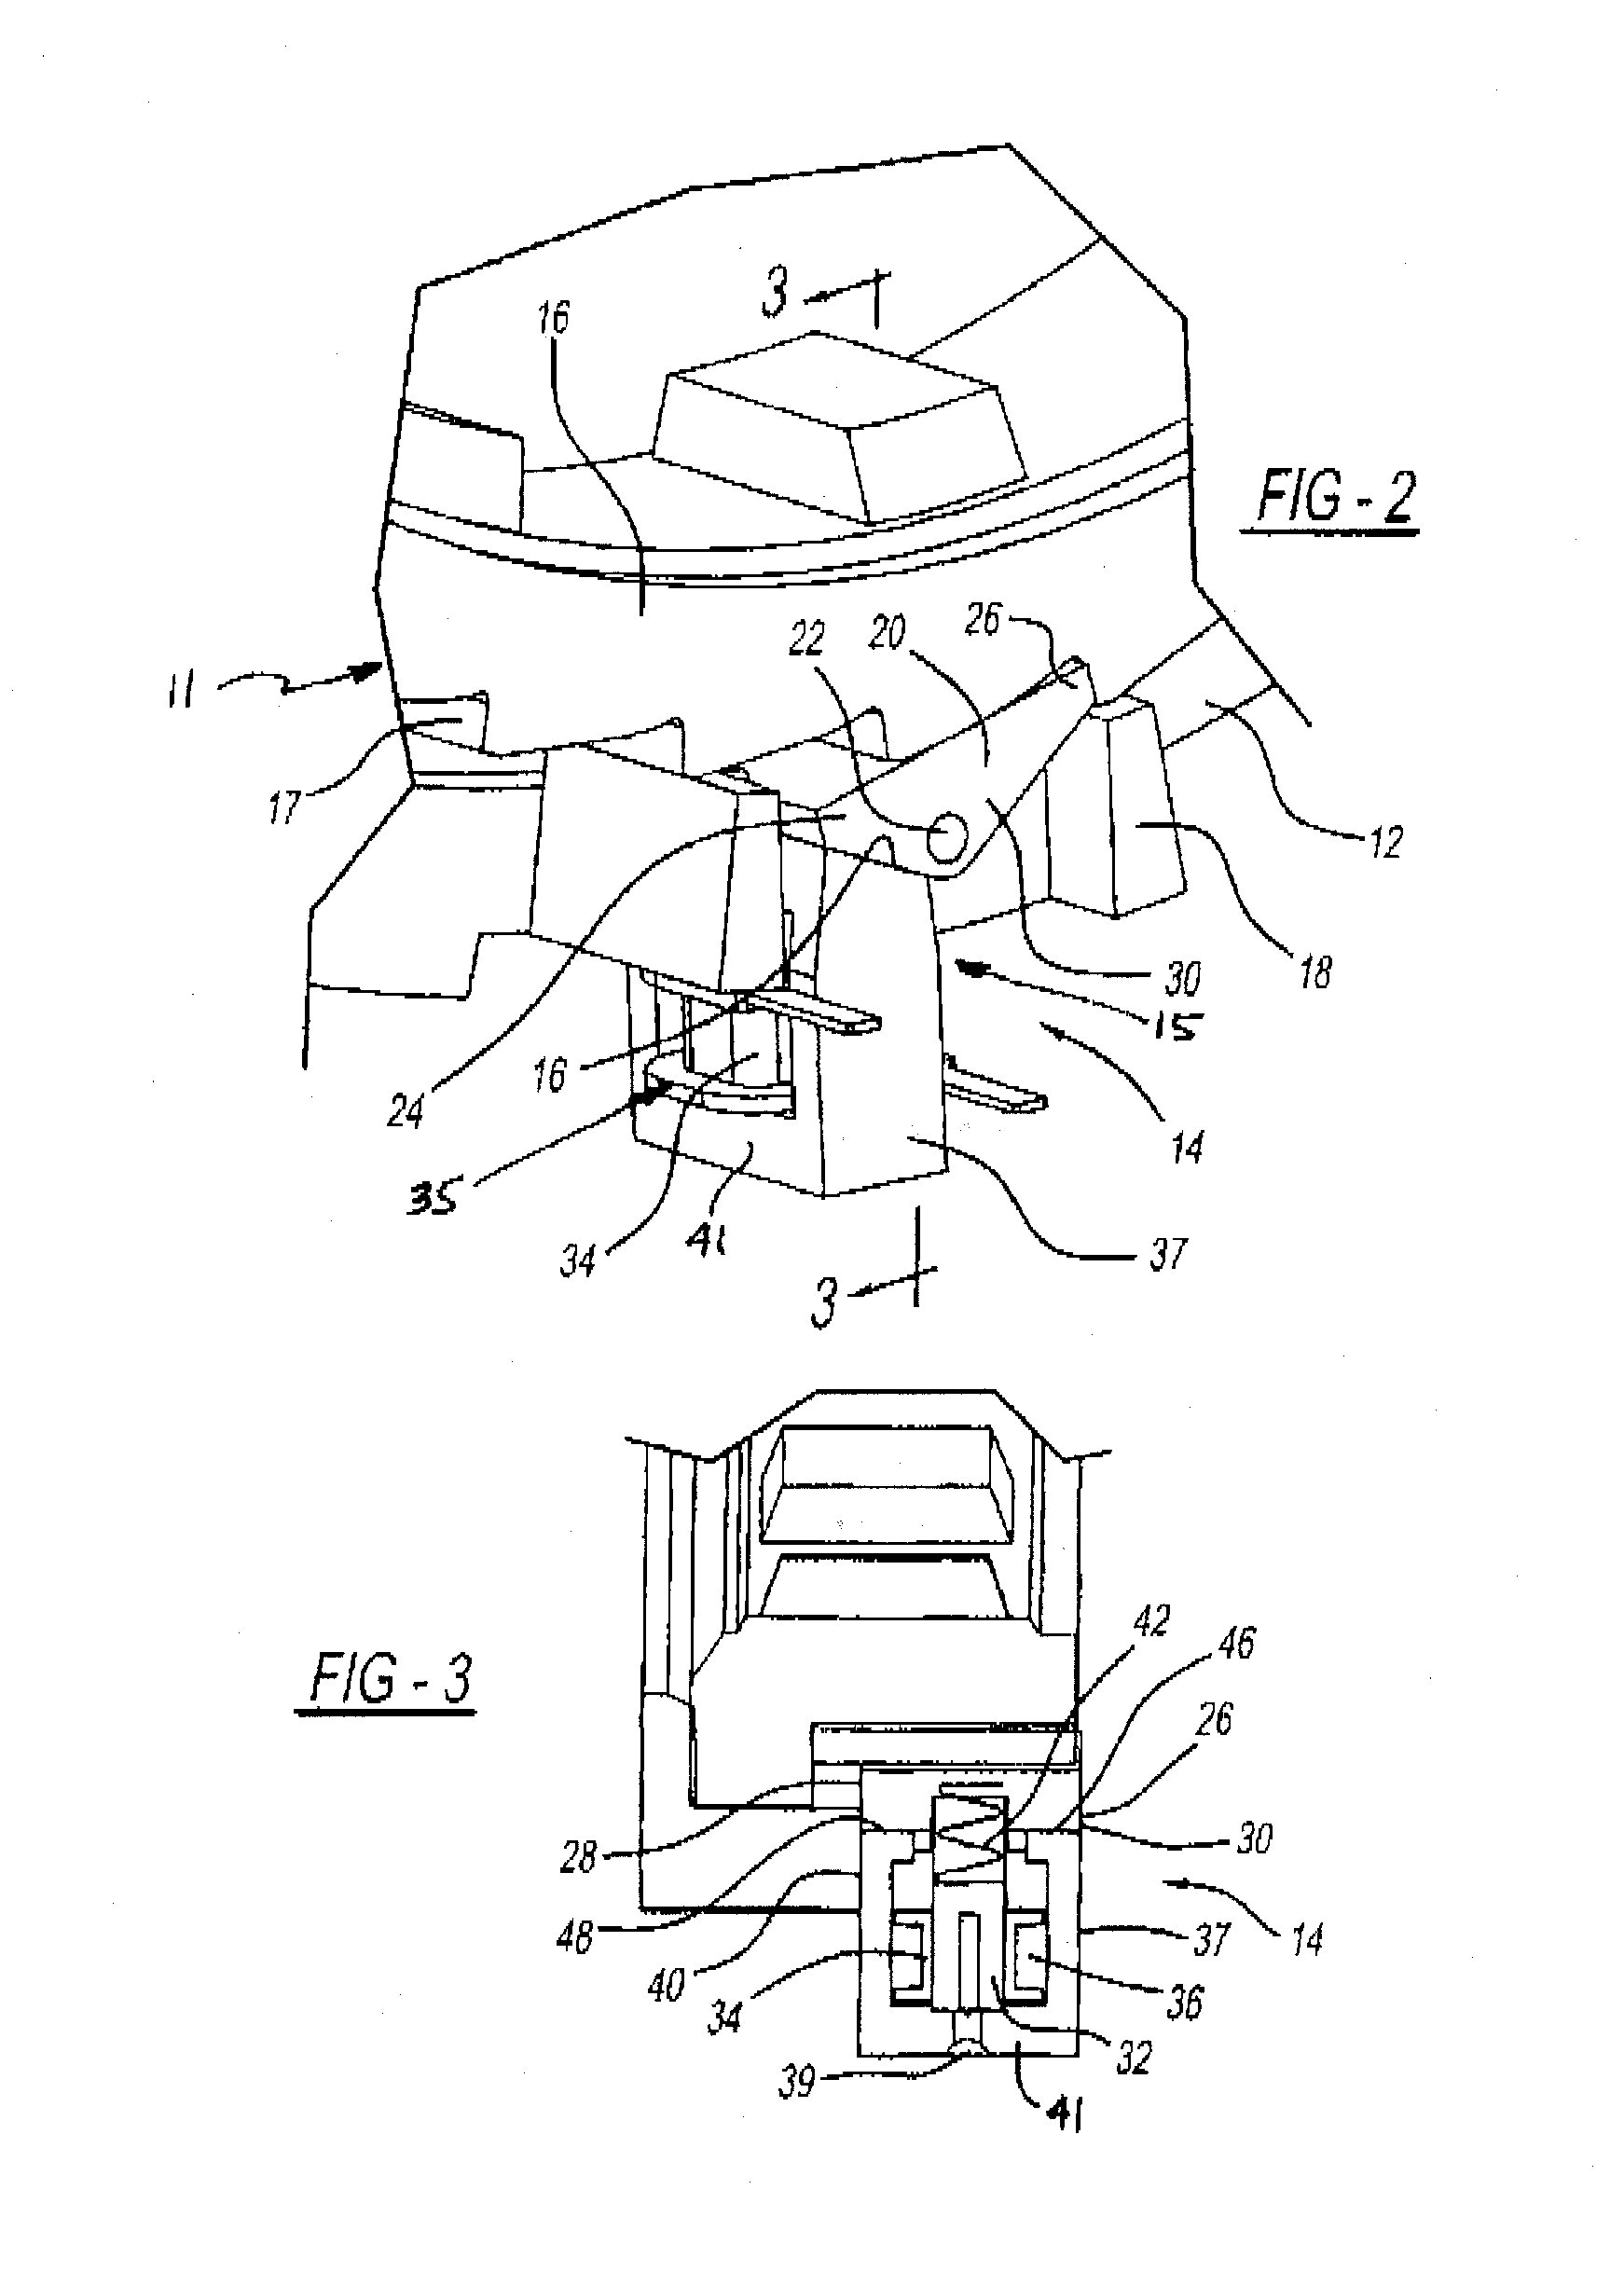 Selectable one-way clutch having strut with separate armature